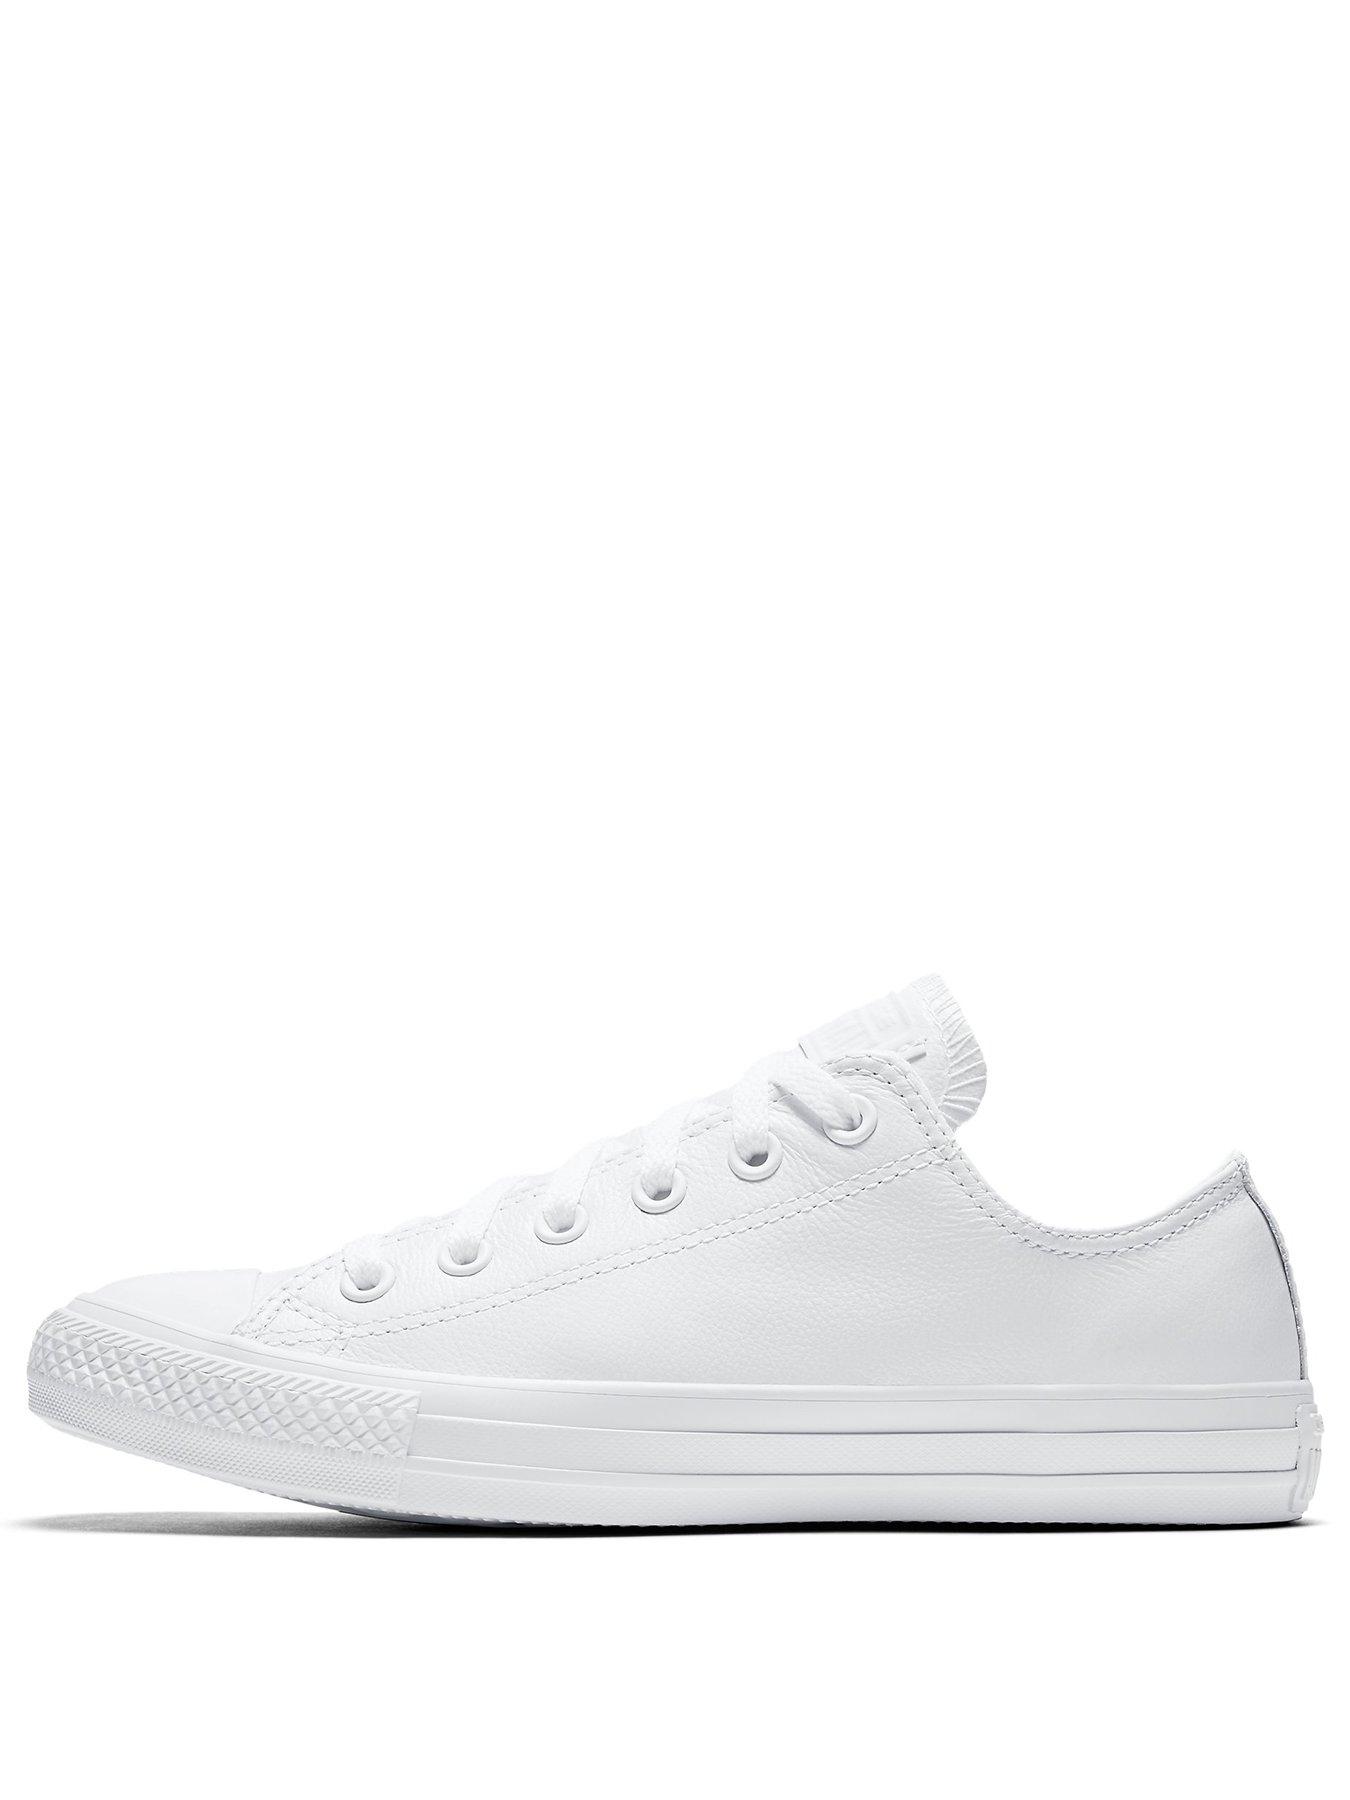 chuck taylor all star white leather